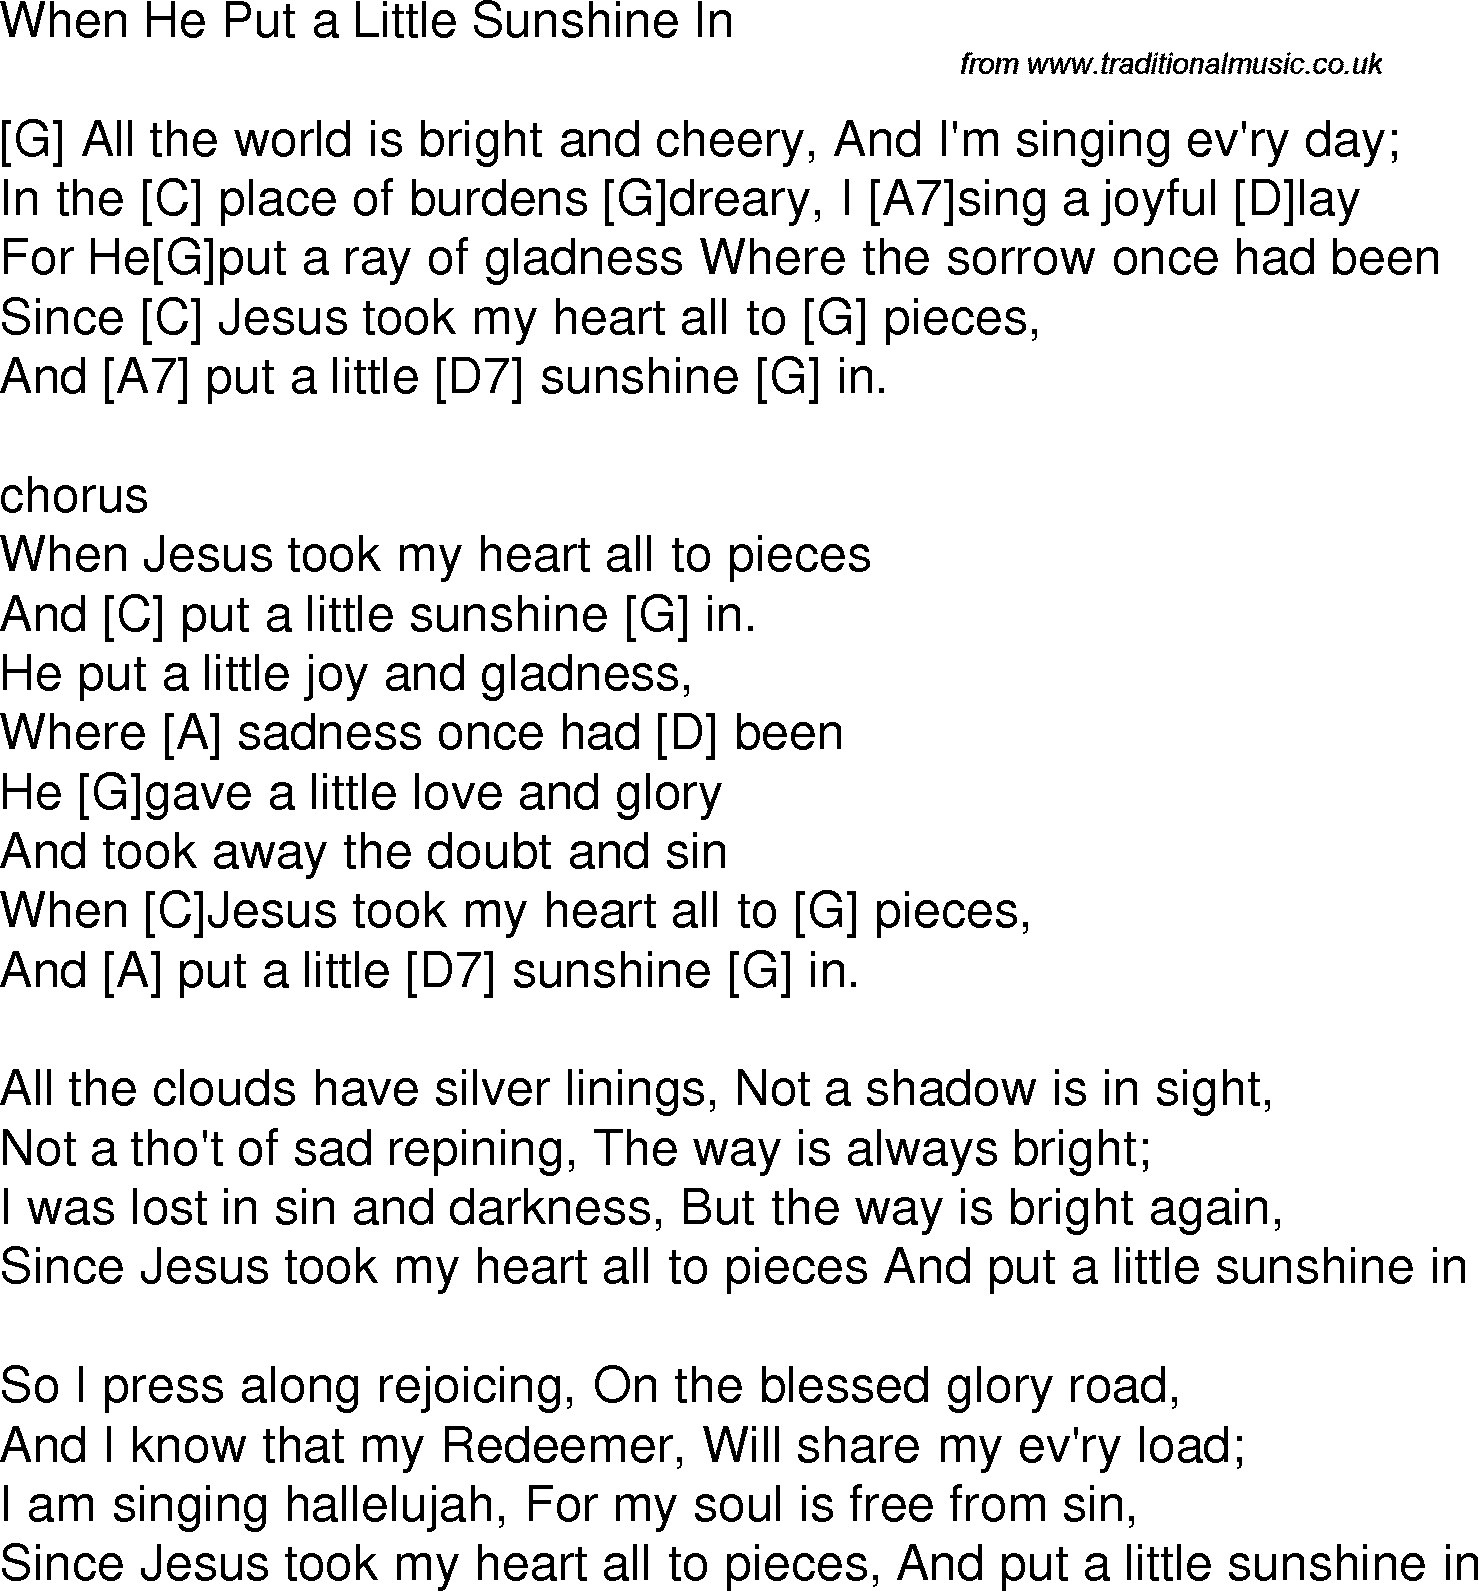 Old time song lyrics with chords for When He Put A Little Sunshine In G